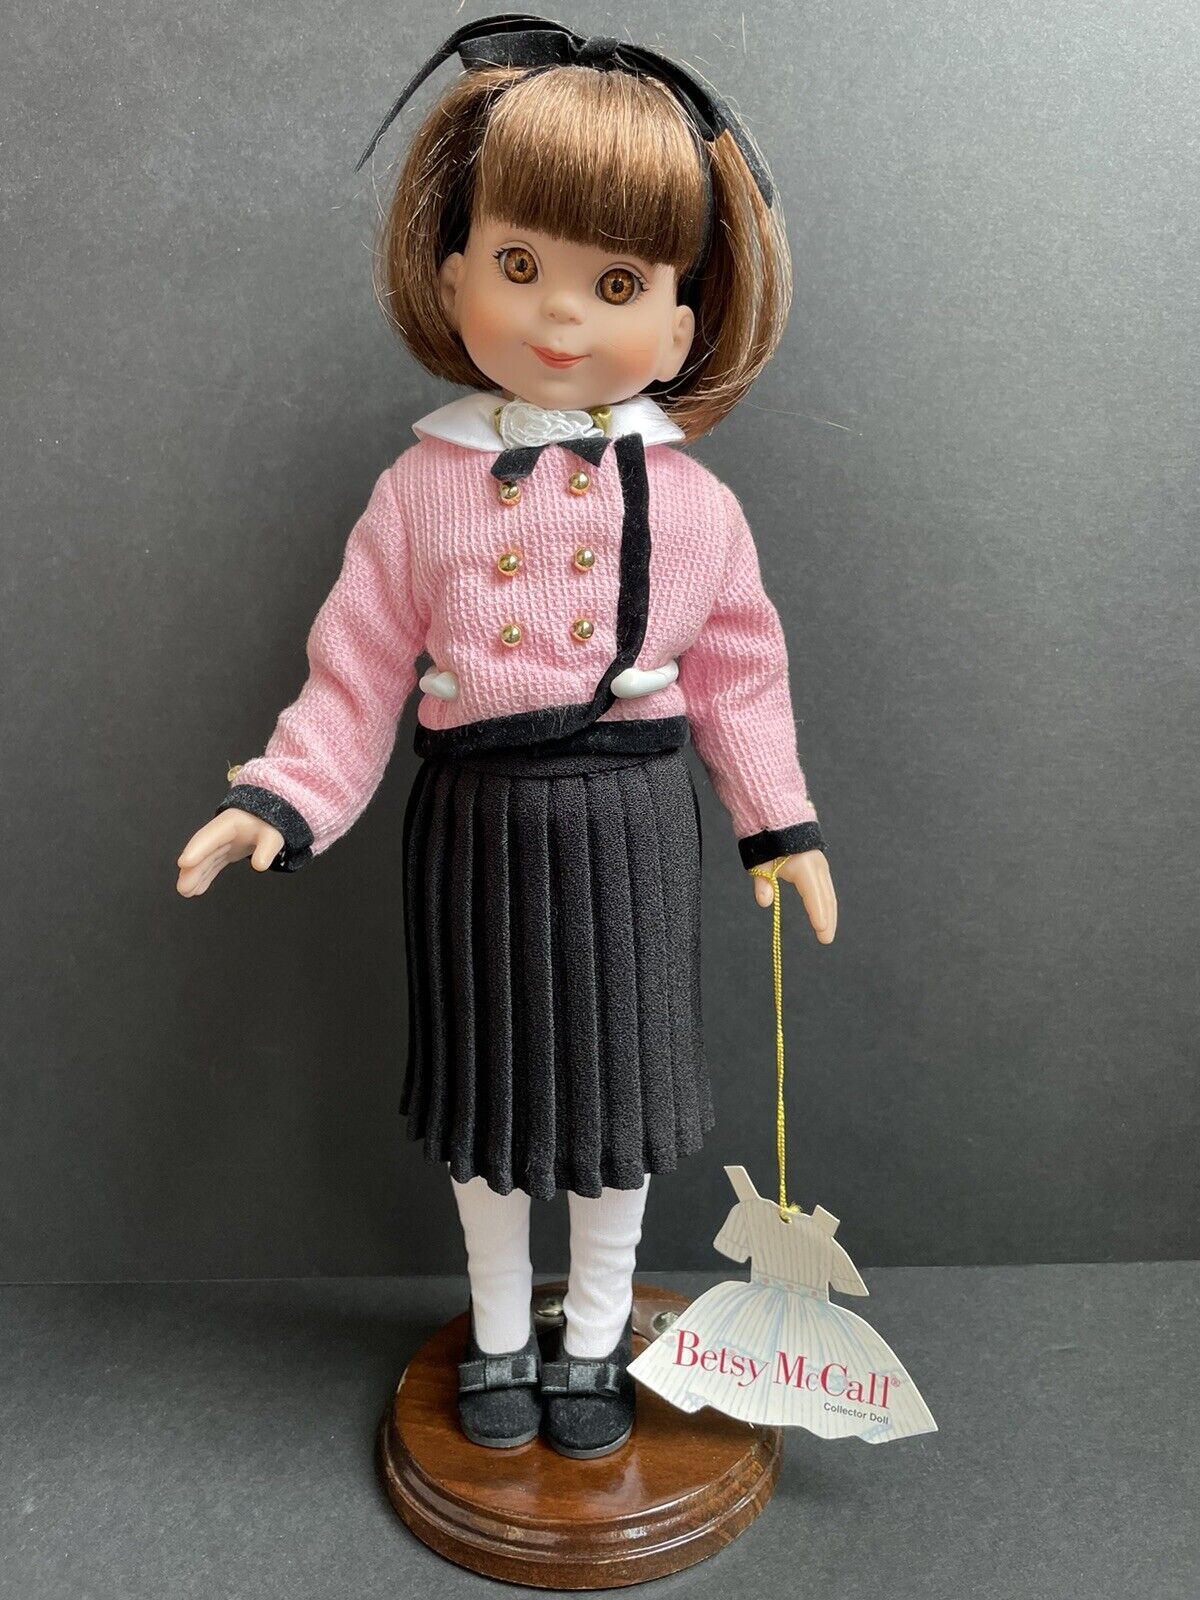 Collectible Tonner Vinyl Betsy McCall “Perfectly Suited” Doll with Tag